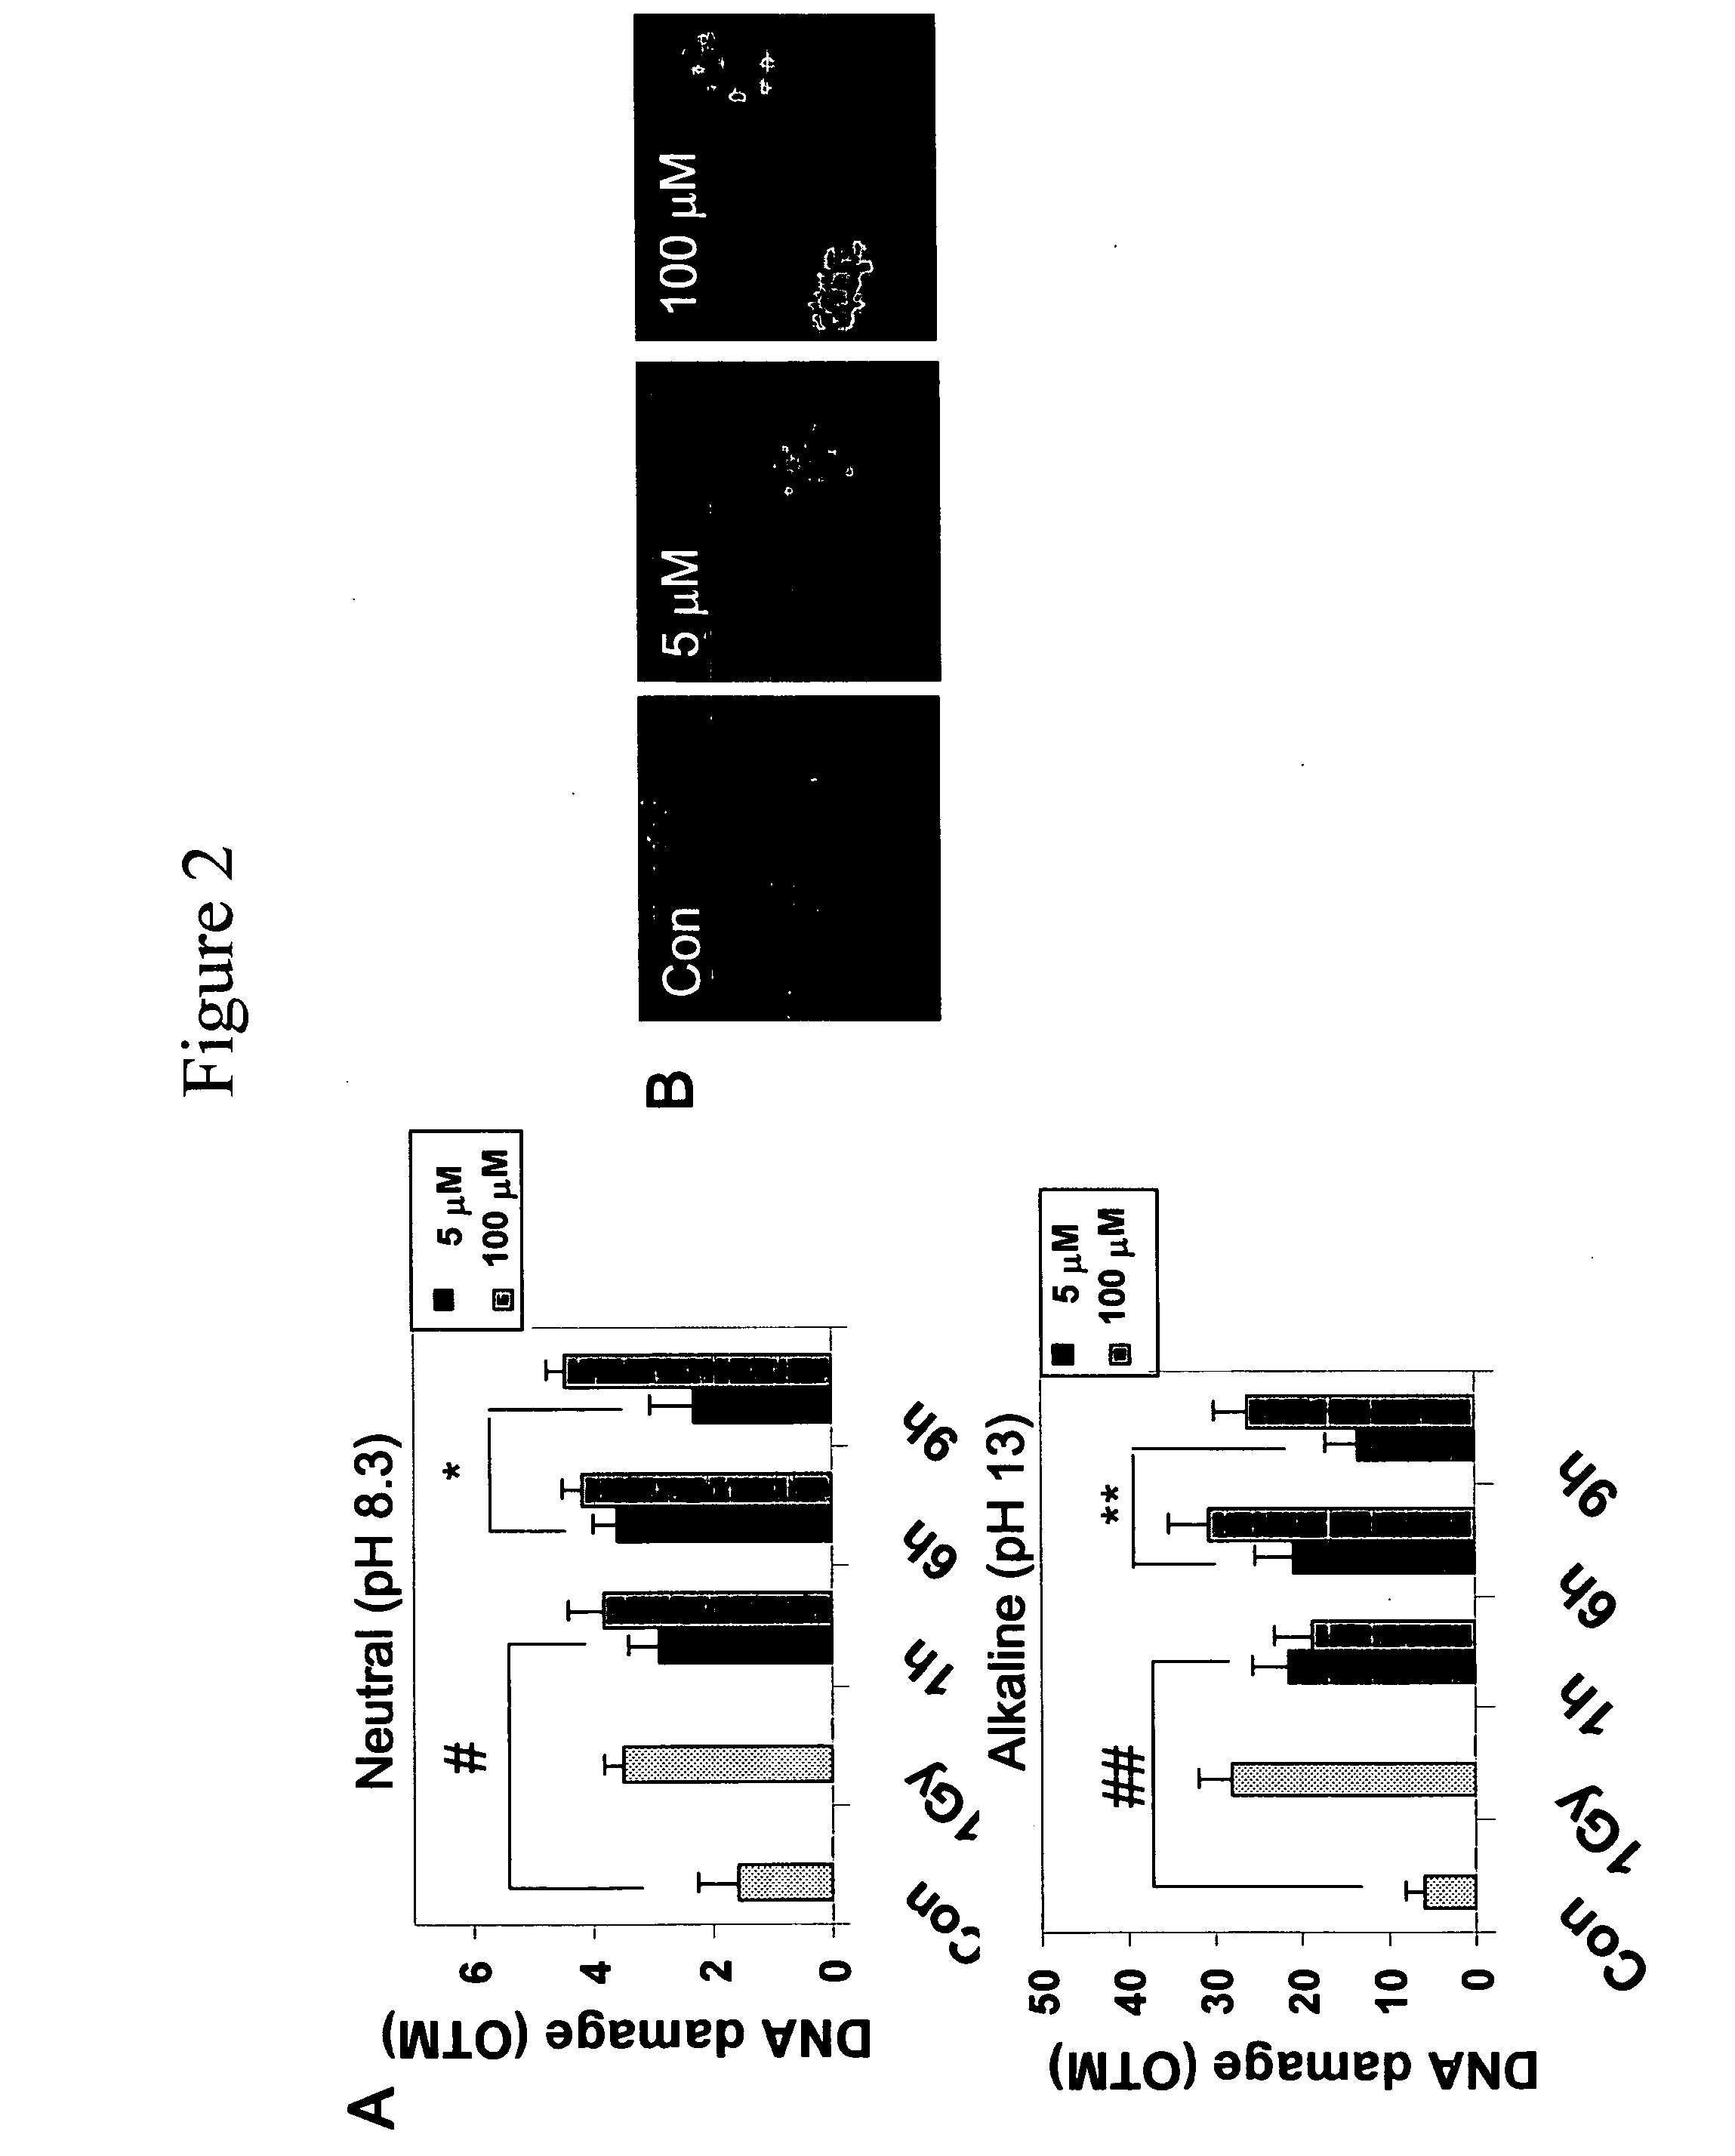 Methods of neuroprotection by cyclin-dependent kinase inhibition